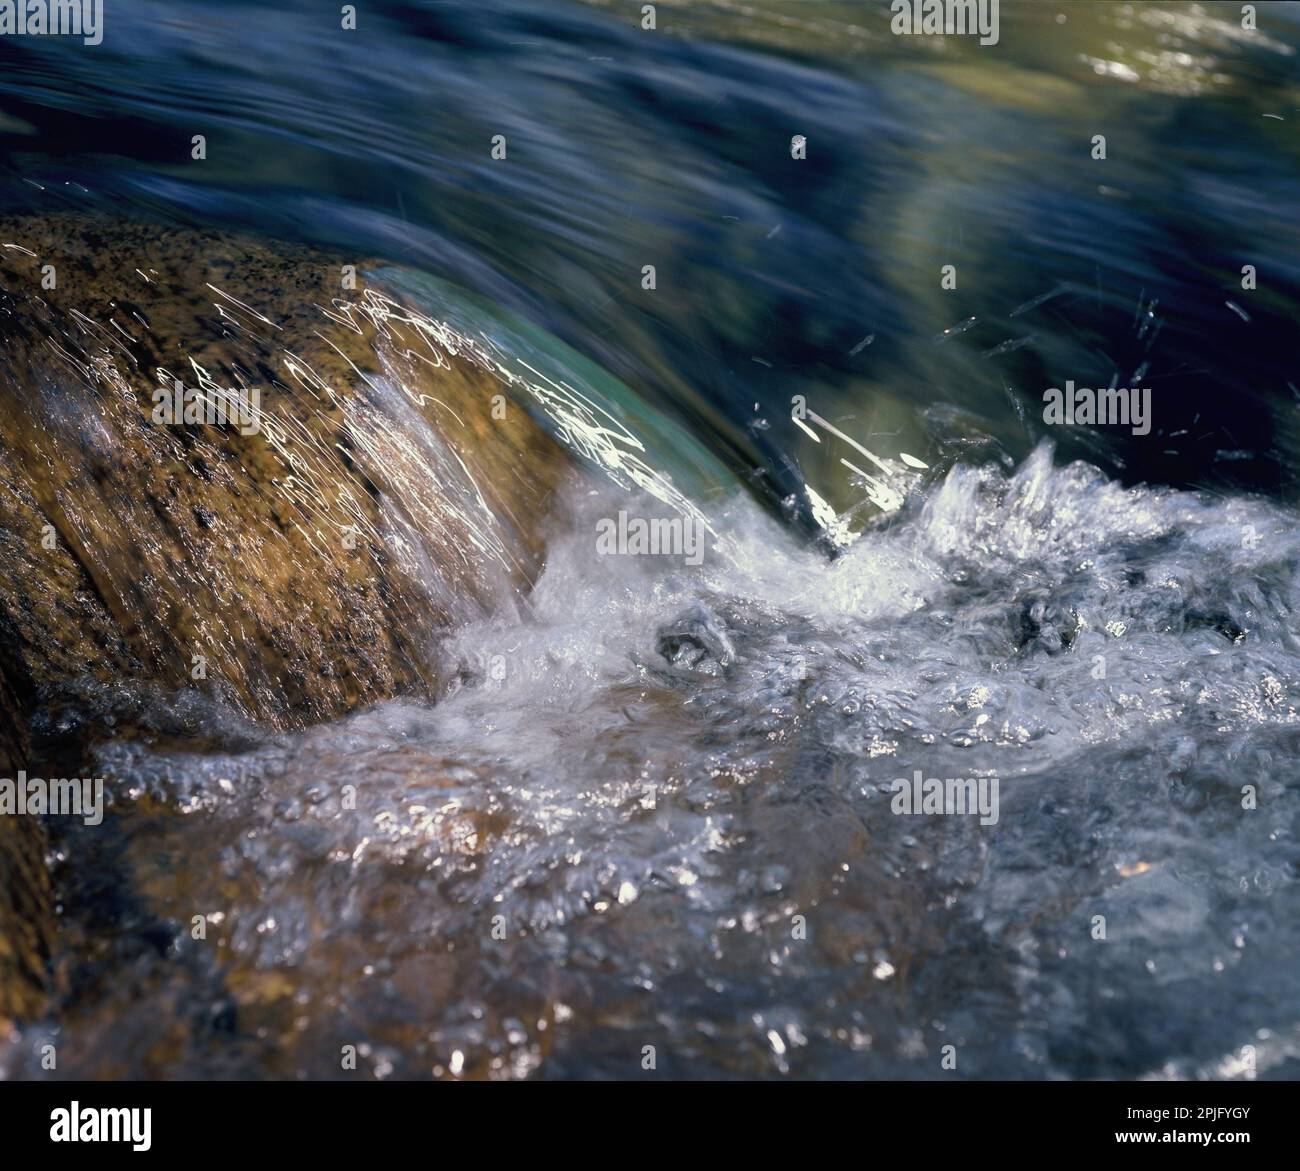 Japan. Close-up of fast-flowing stream over boulders. Stock Photo